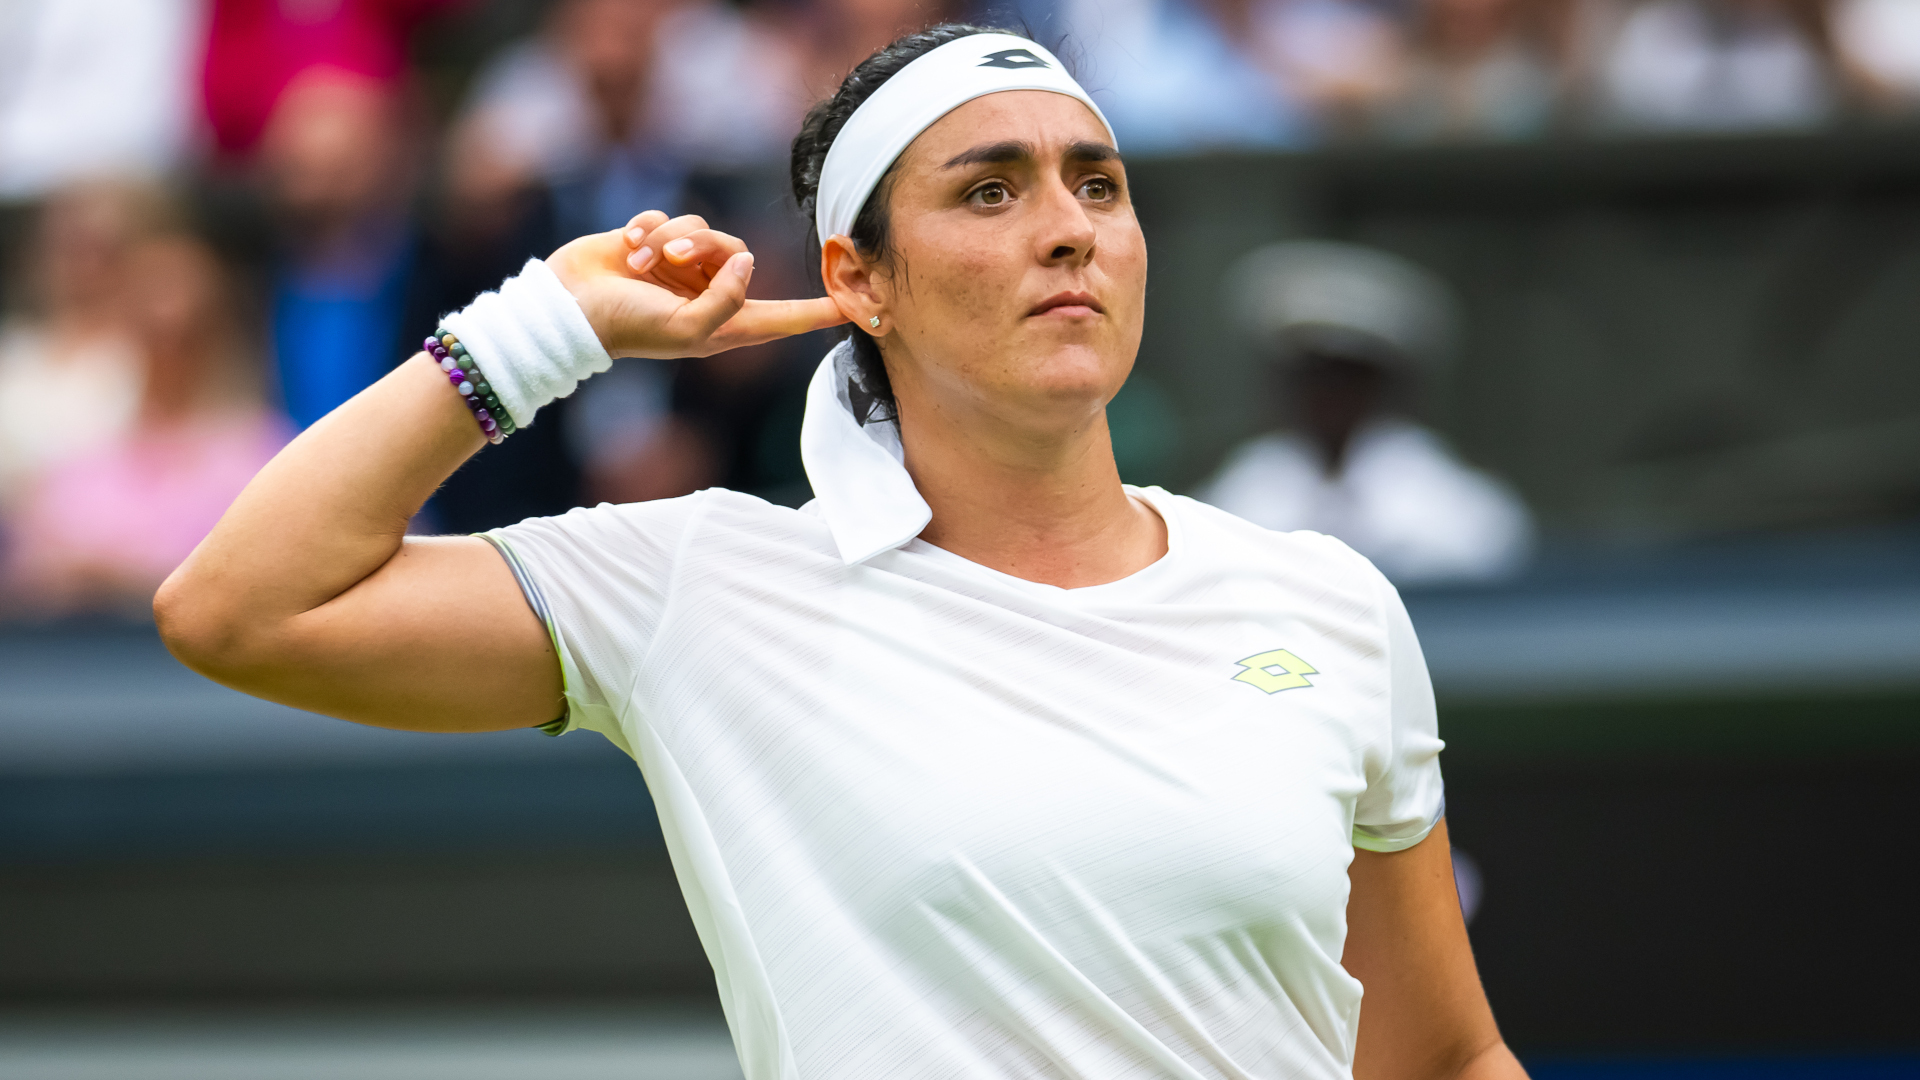 Jabeur vs Vondrousova live stream — how to watch the Wimbledon womens final for free today What Hi-Fi?